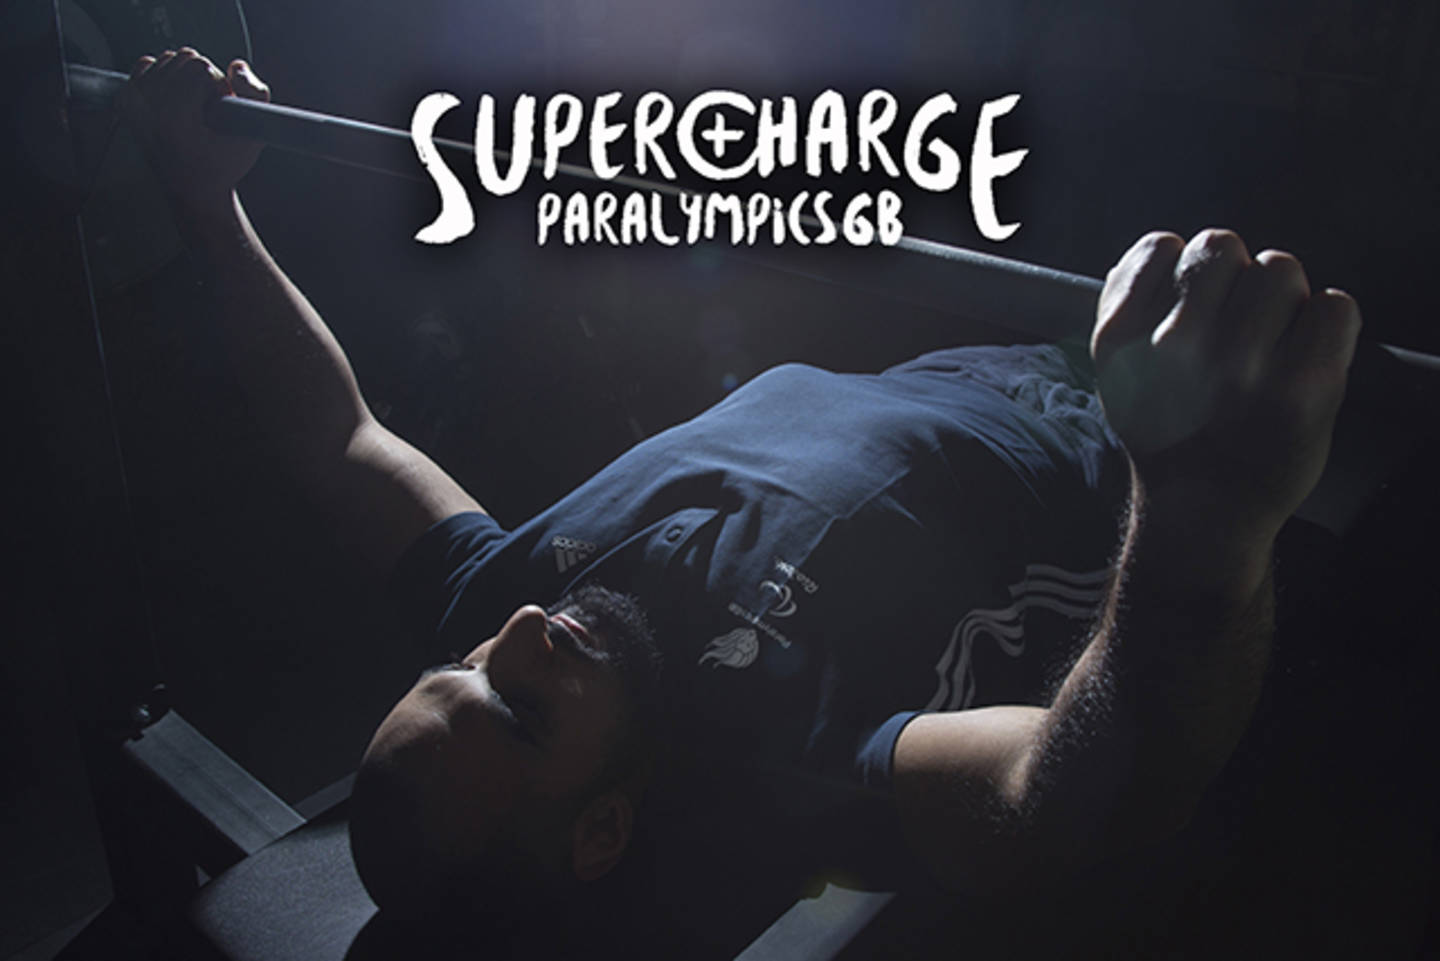 Supercharge ParalympicsGB